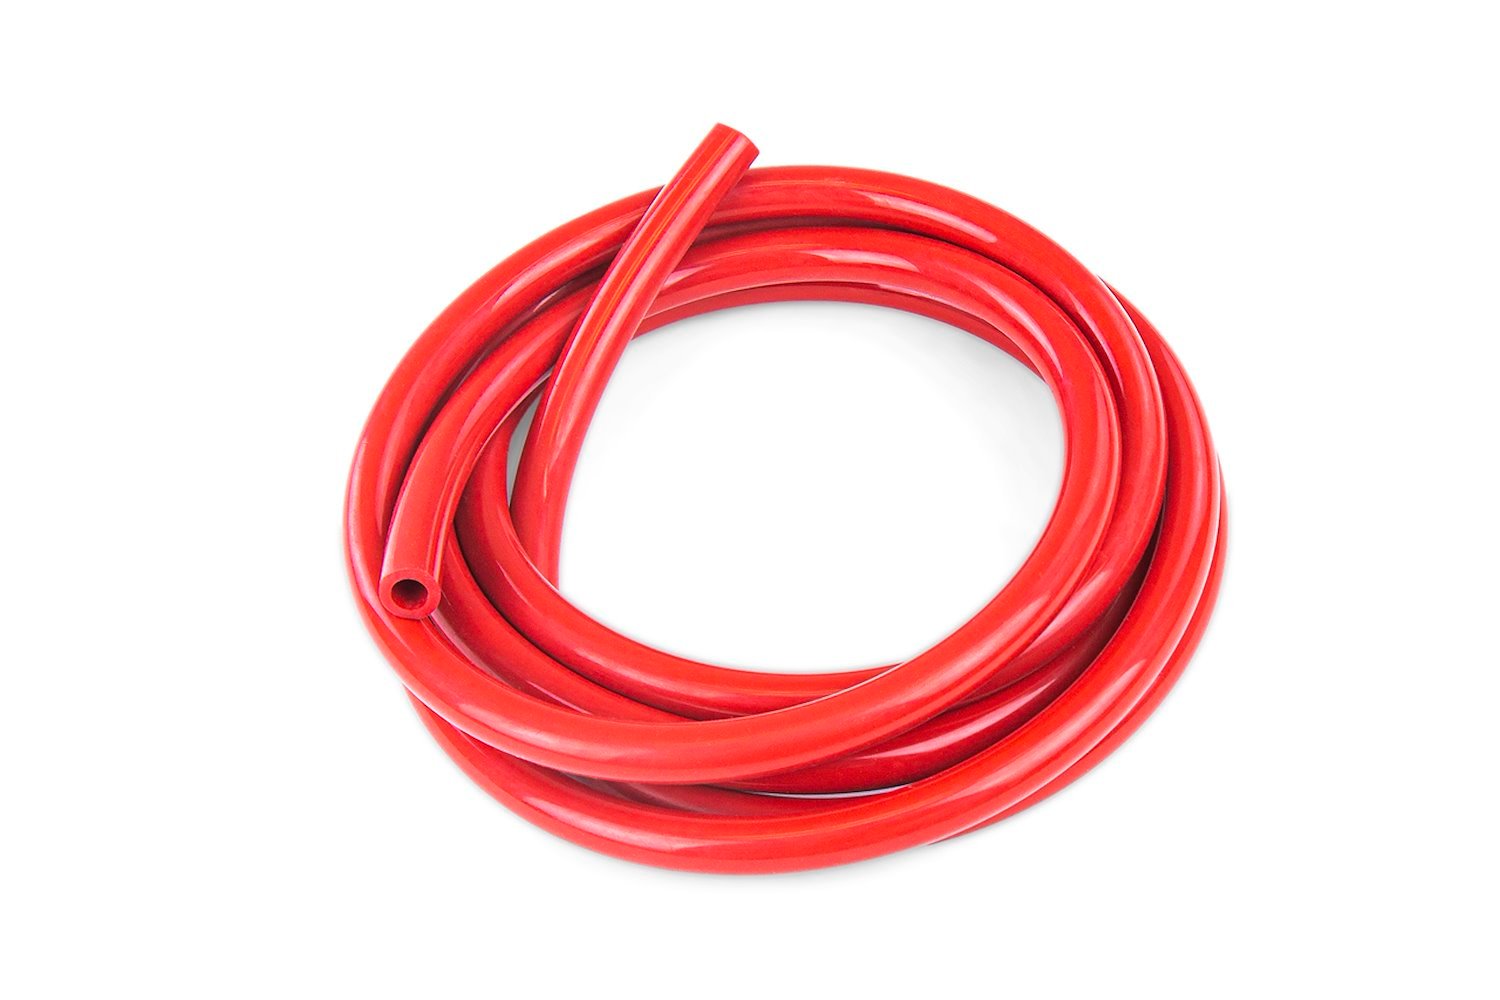 HTSVH35-REDx10 High-Temperature Silicone Vacuum Hose Tubing, 3.5 mm ID, 10 ft. Roll, Red